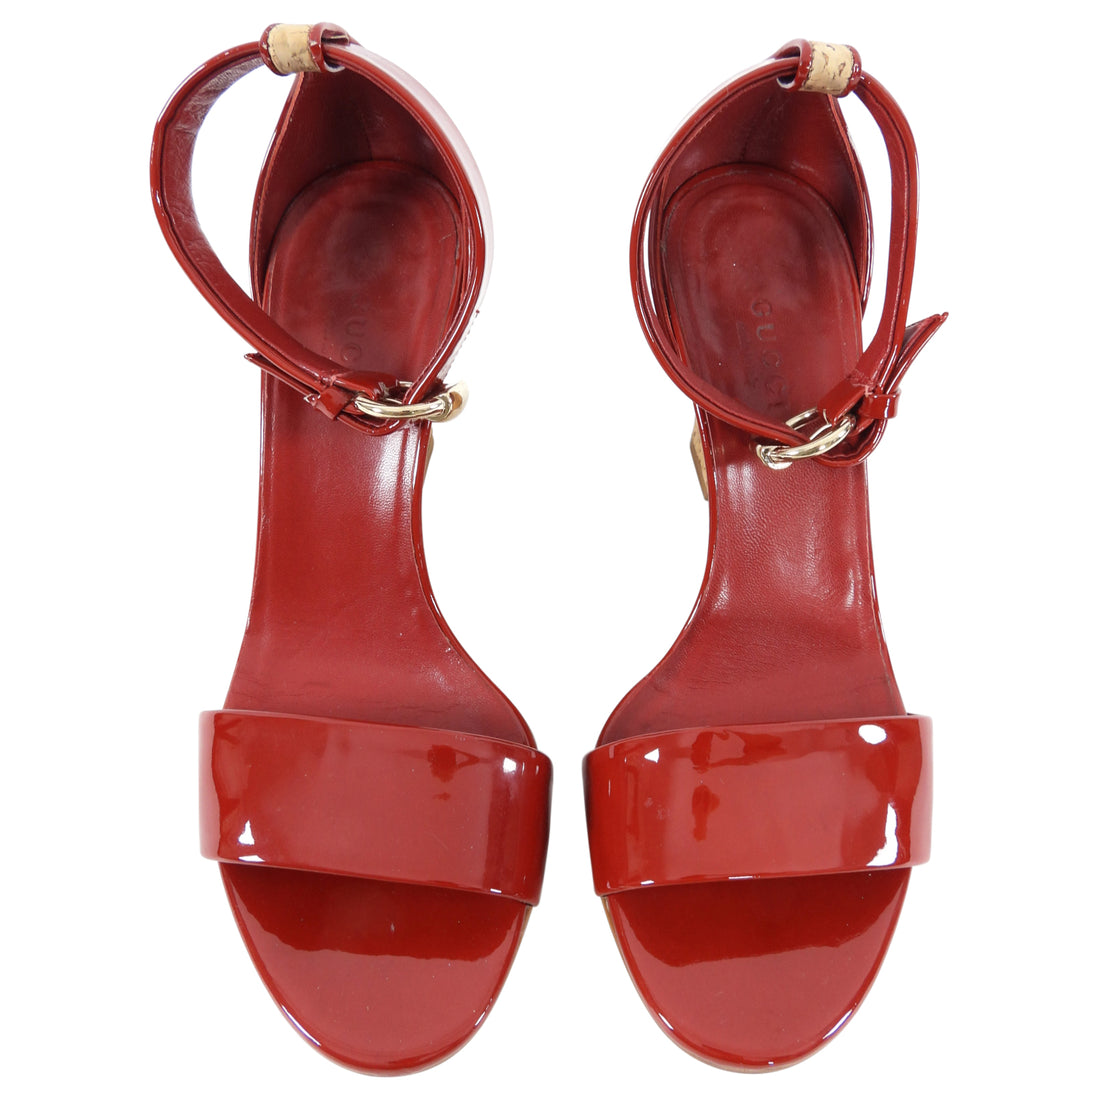 Gucci Red Patent Leather and Cork Wedge Sandals - 5.5